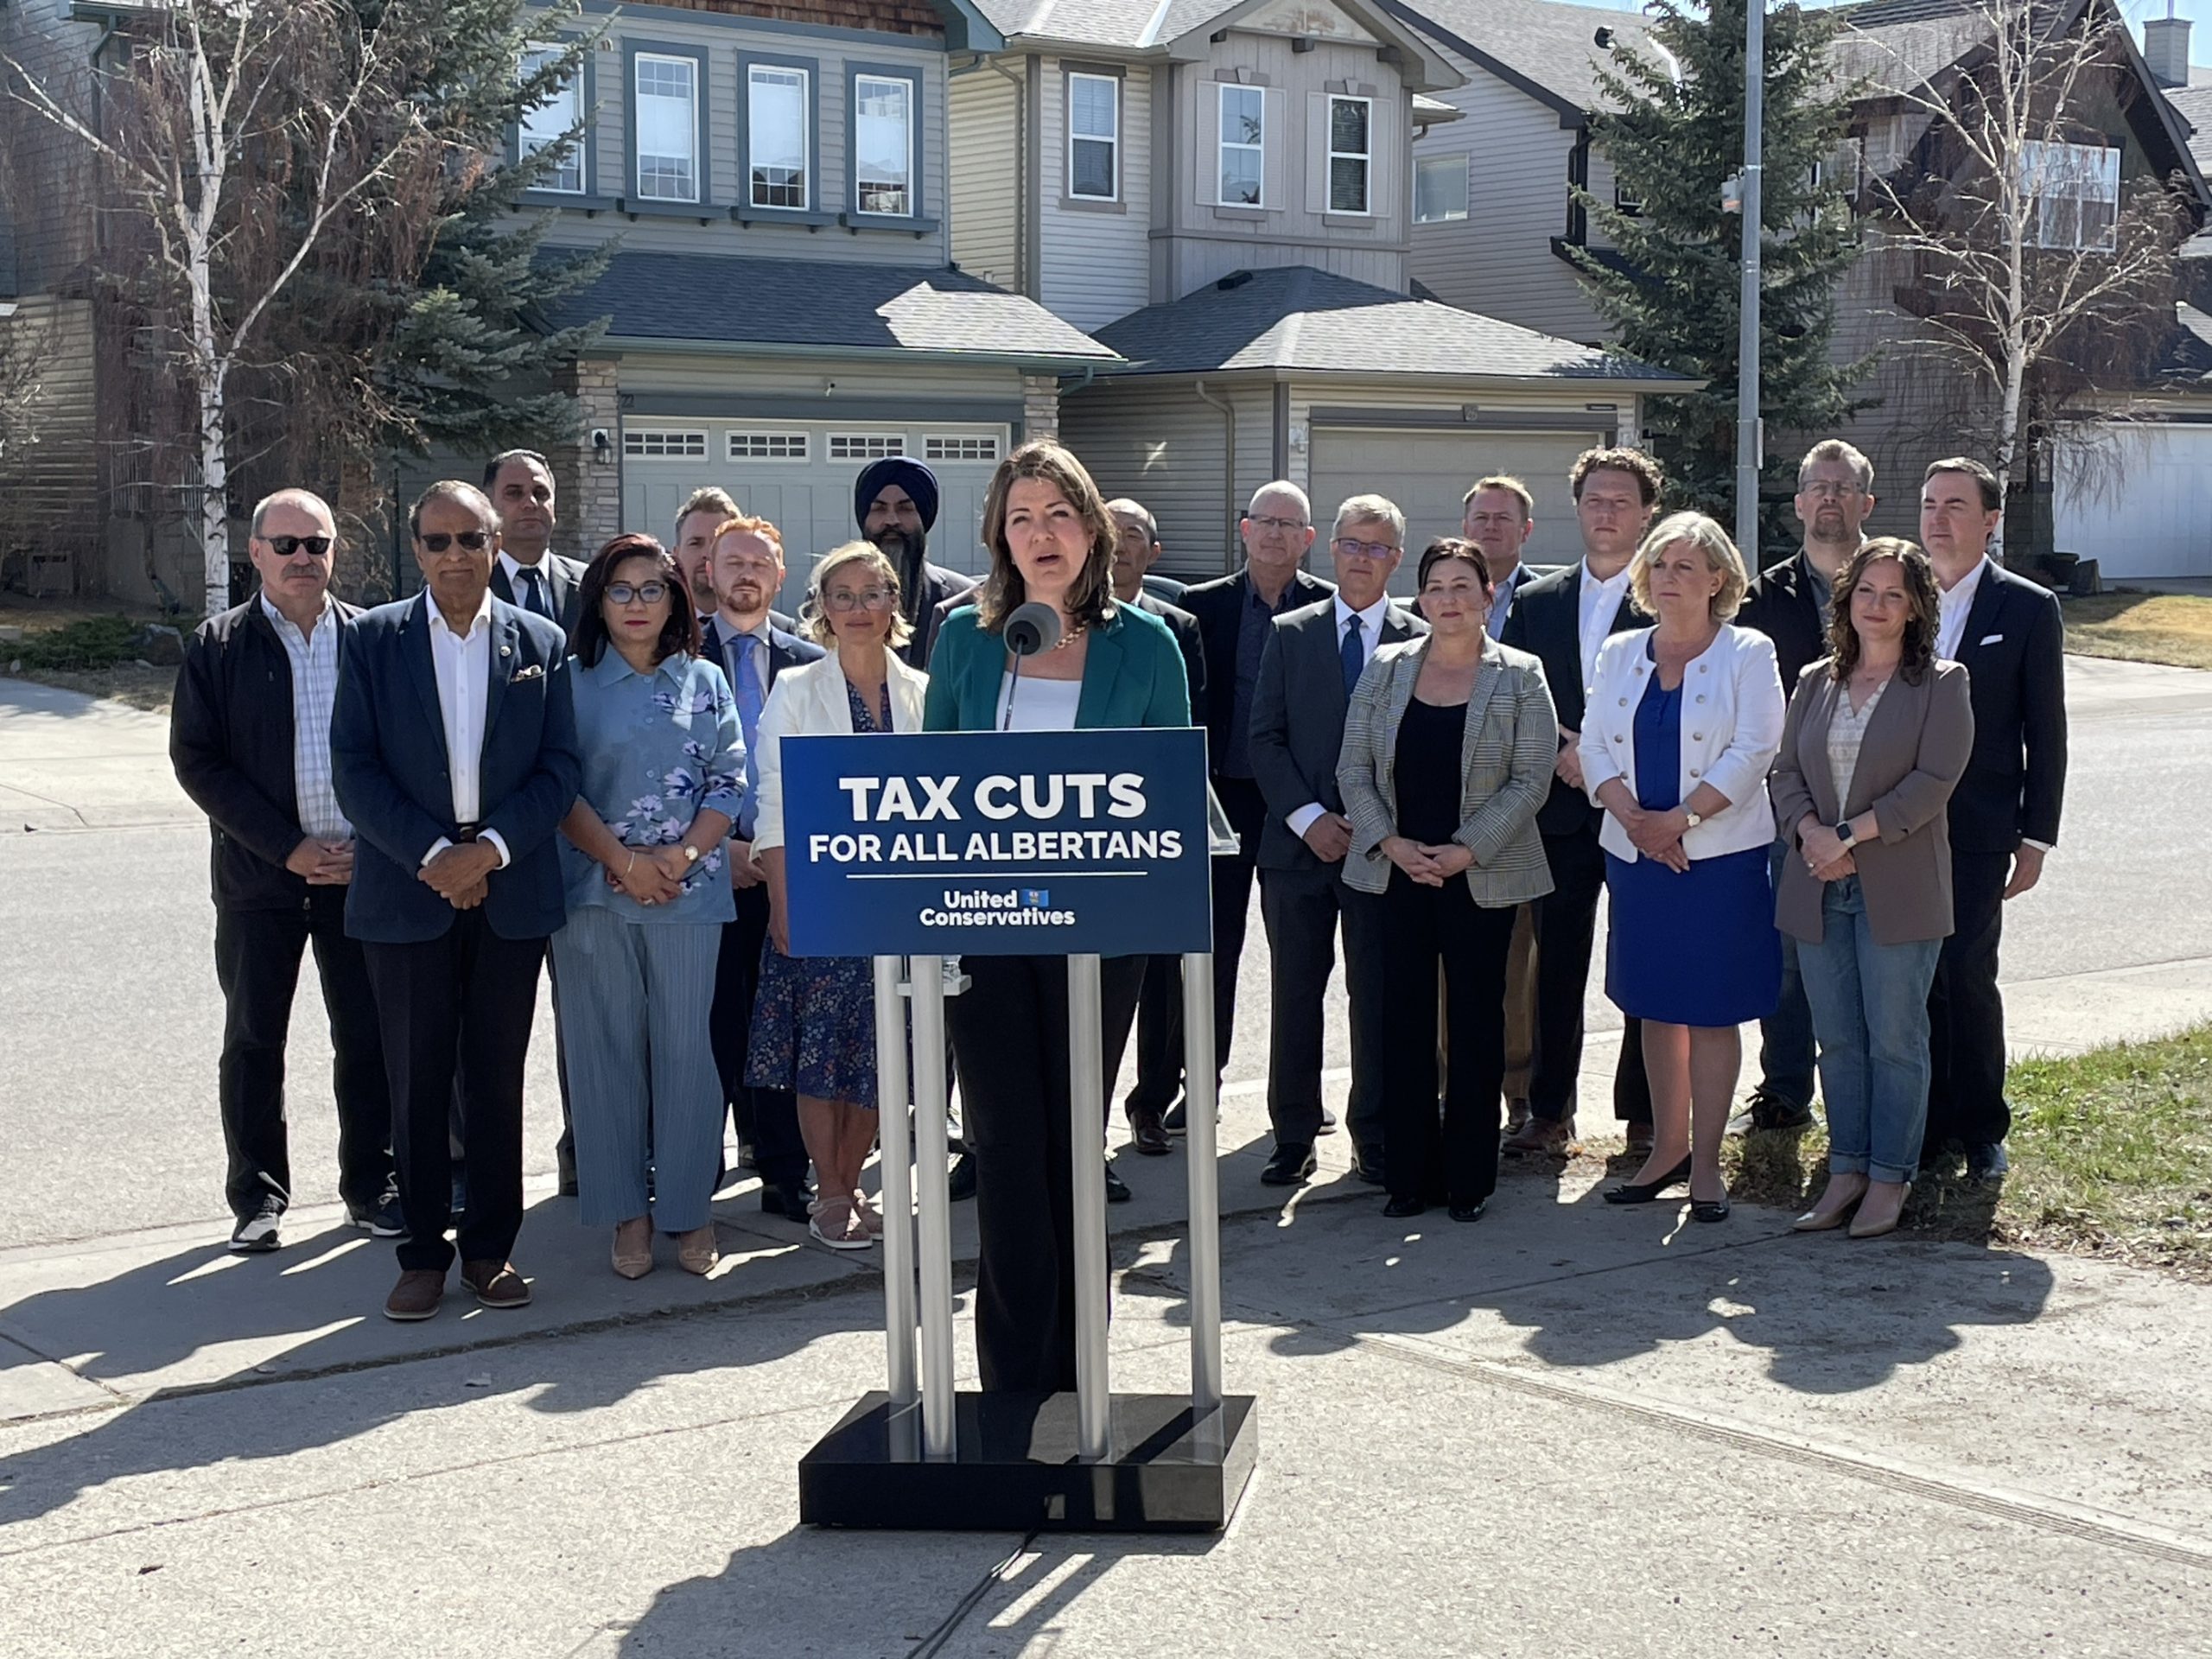 UCP leader Danielle Smith with other UCP in Calgary